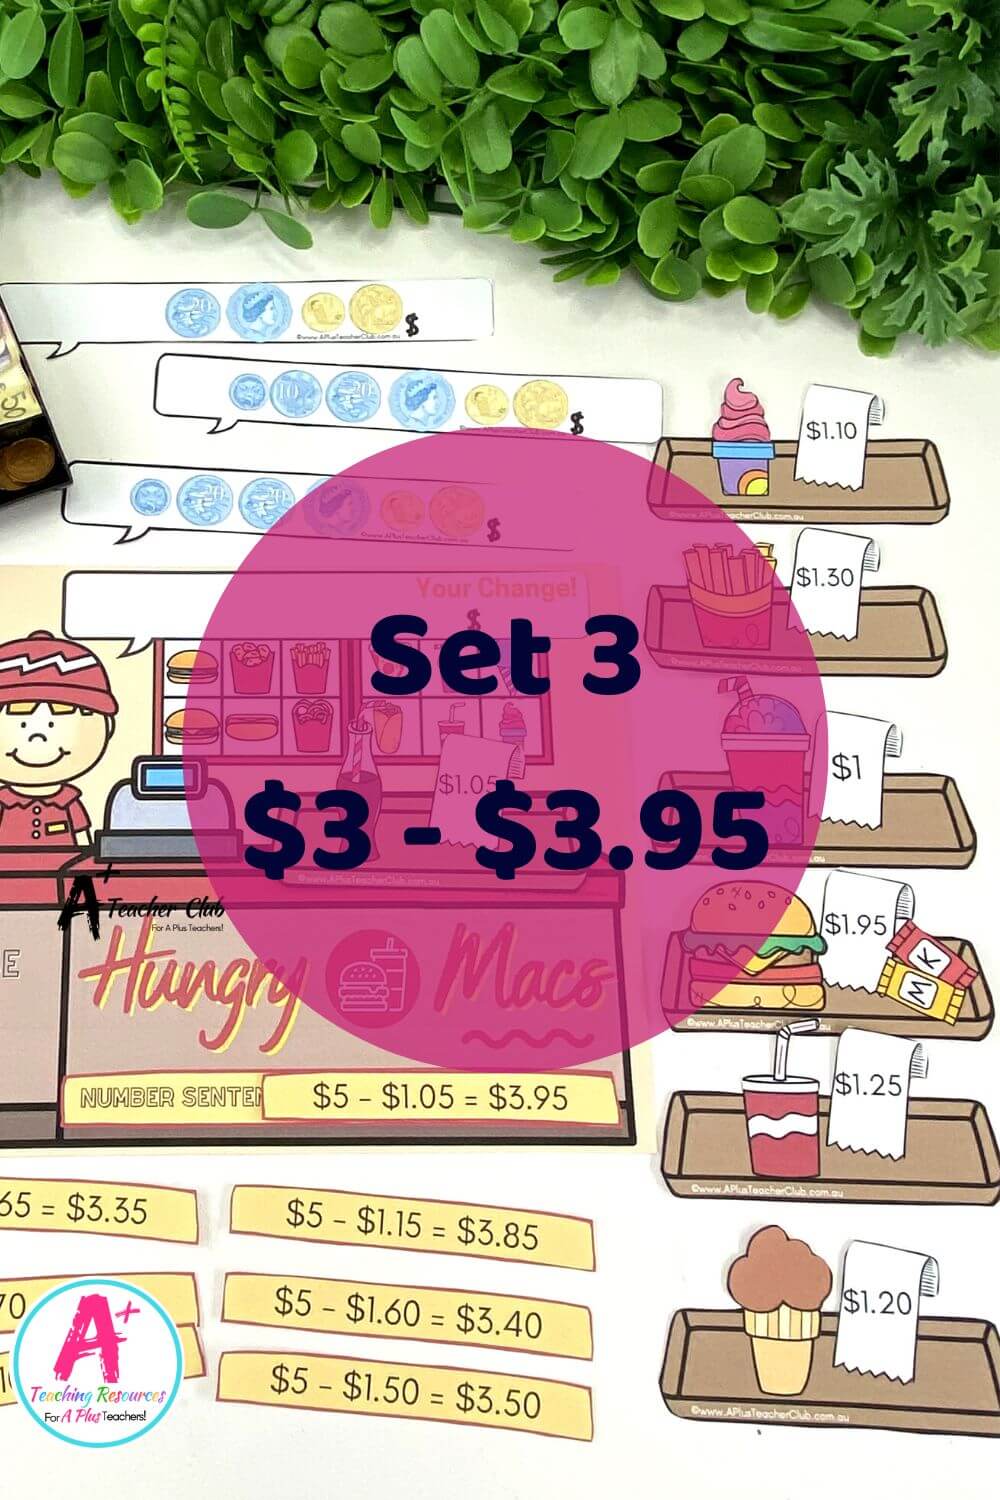 Counting Change Games - Fast Food Set 3 ($3-$3.95)